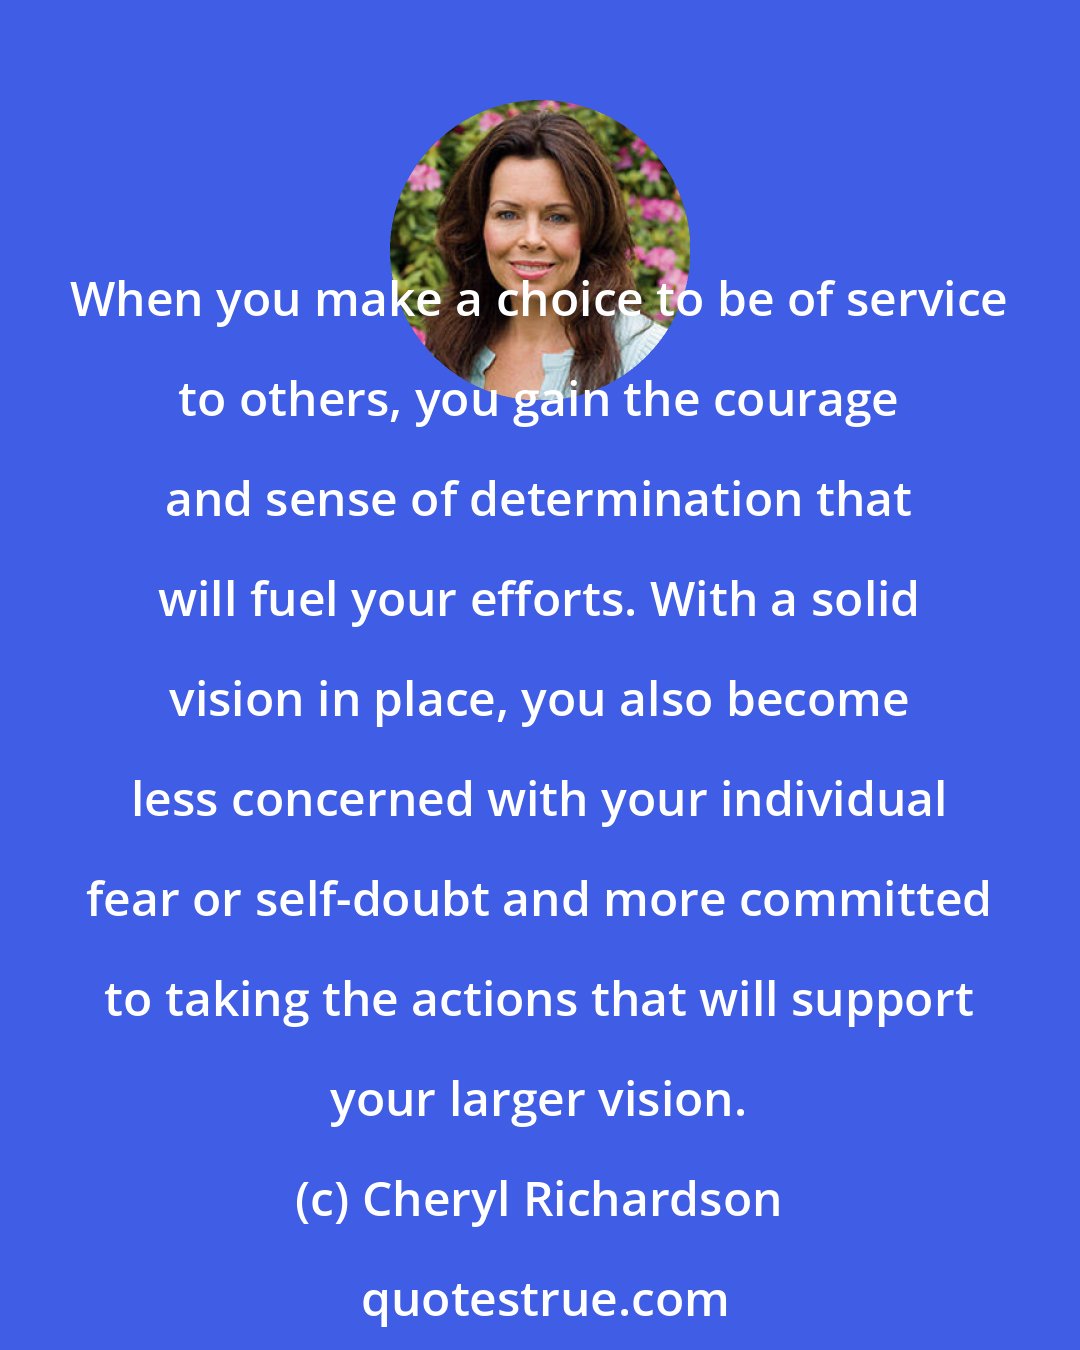 Cheryl Richardson: When you make a choice to be of service to others, you gain the courage and sense of determination that will fuel your efforts. With a solid vision in place, you also become less concerned with your individual fear or self-doubt and more committed to taking the actions that will support your larger vision.